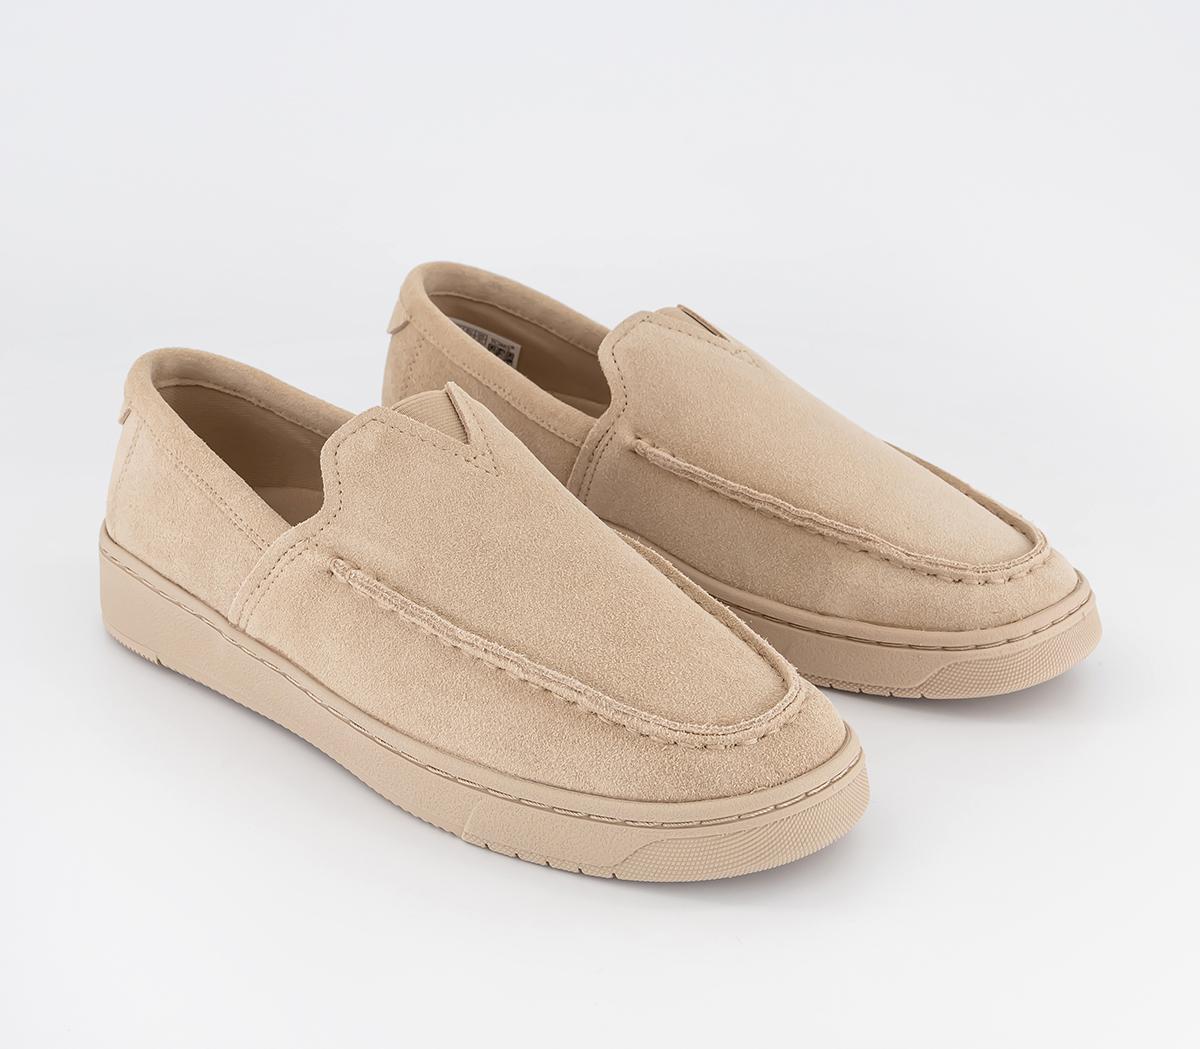 TOMS Mens Trvl Lite Loafers Oatmeal Suede, 10